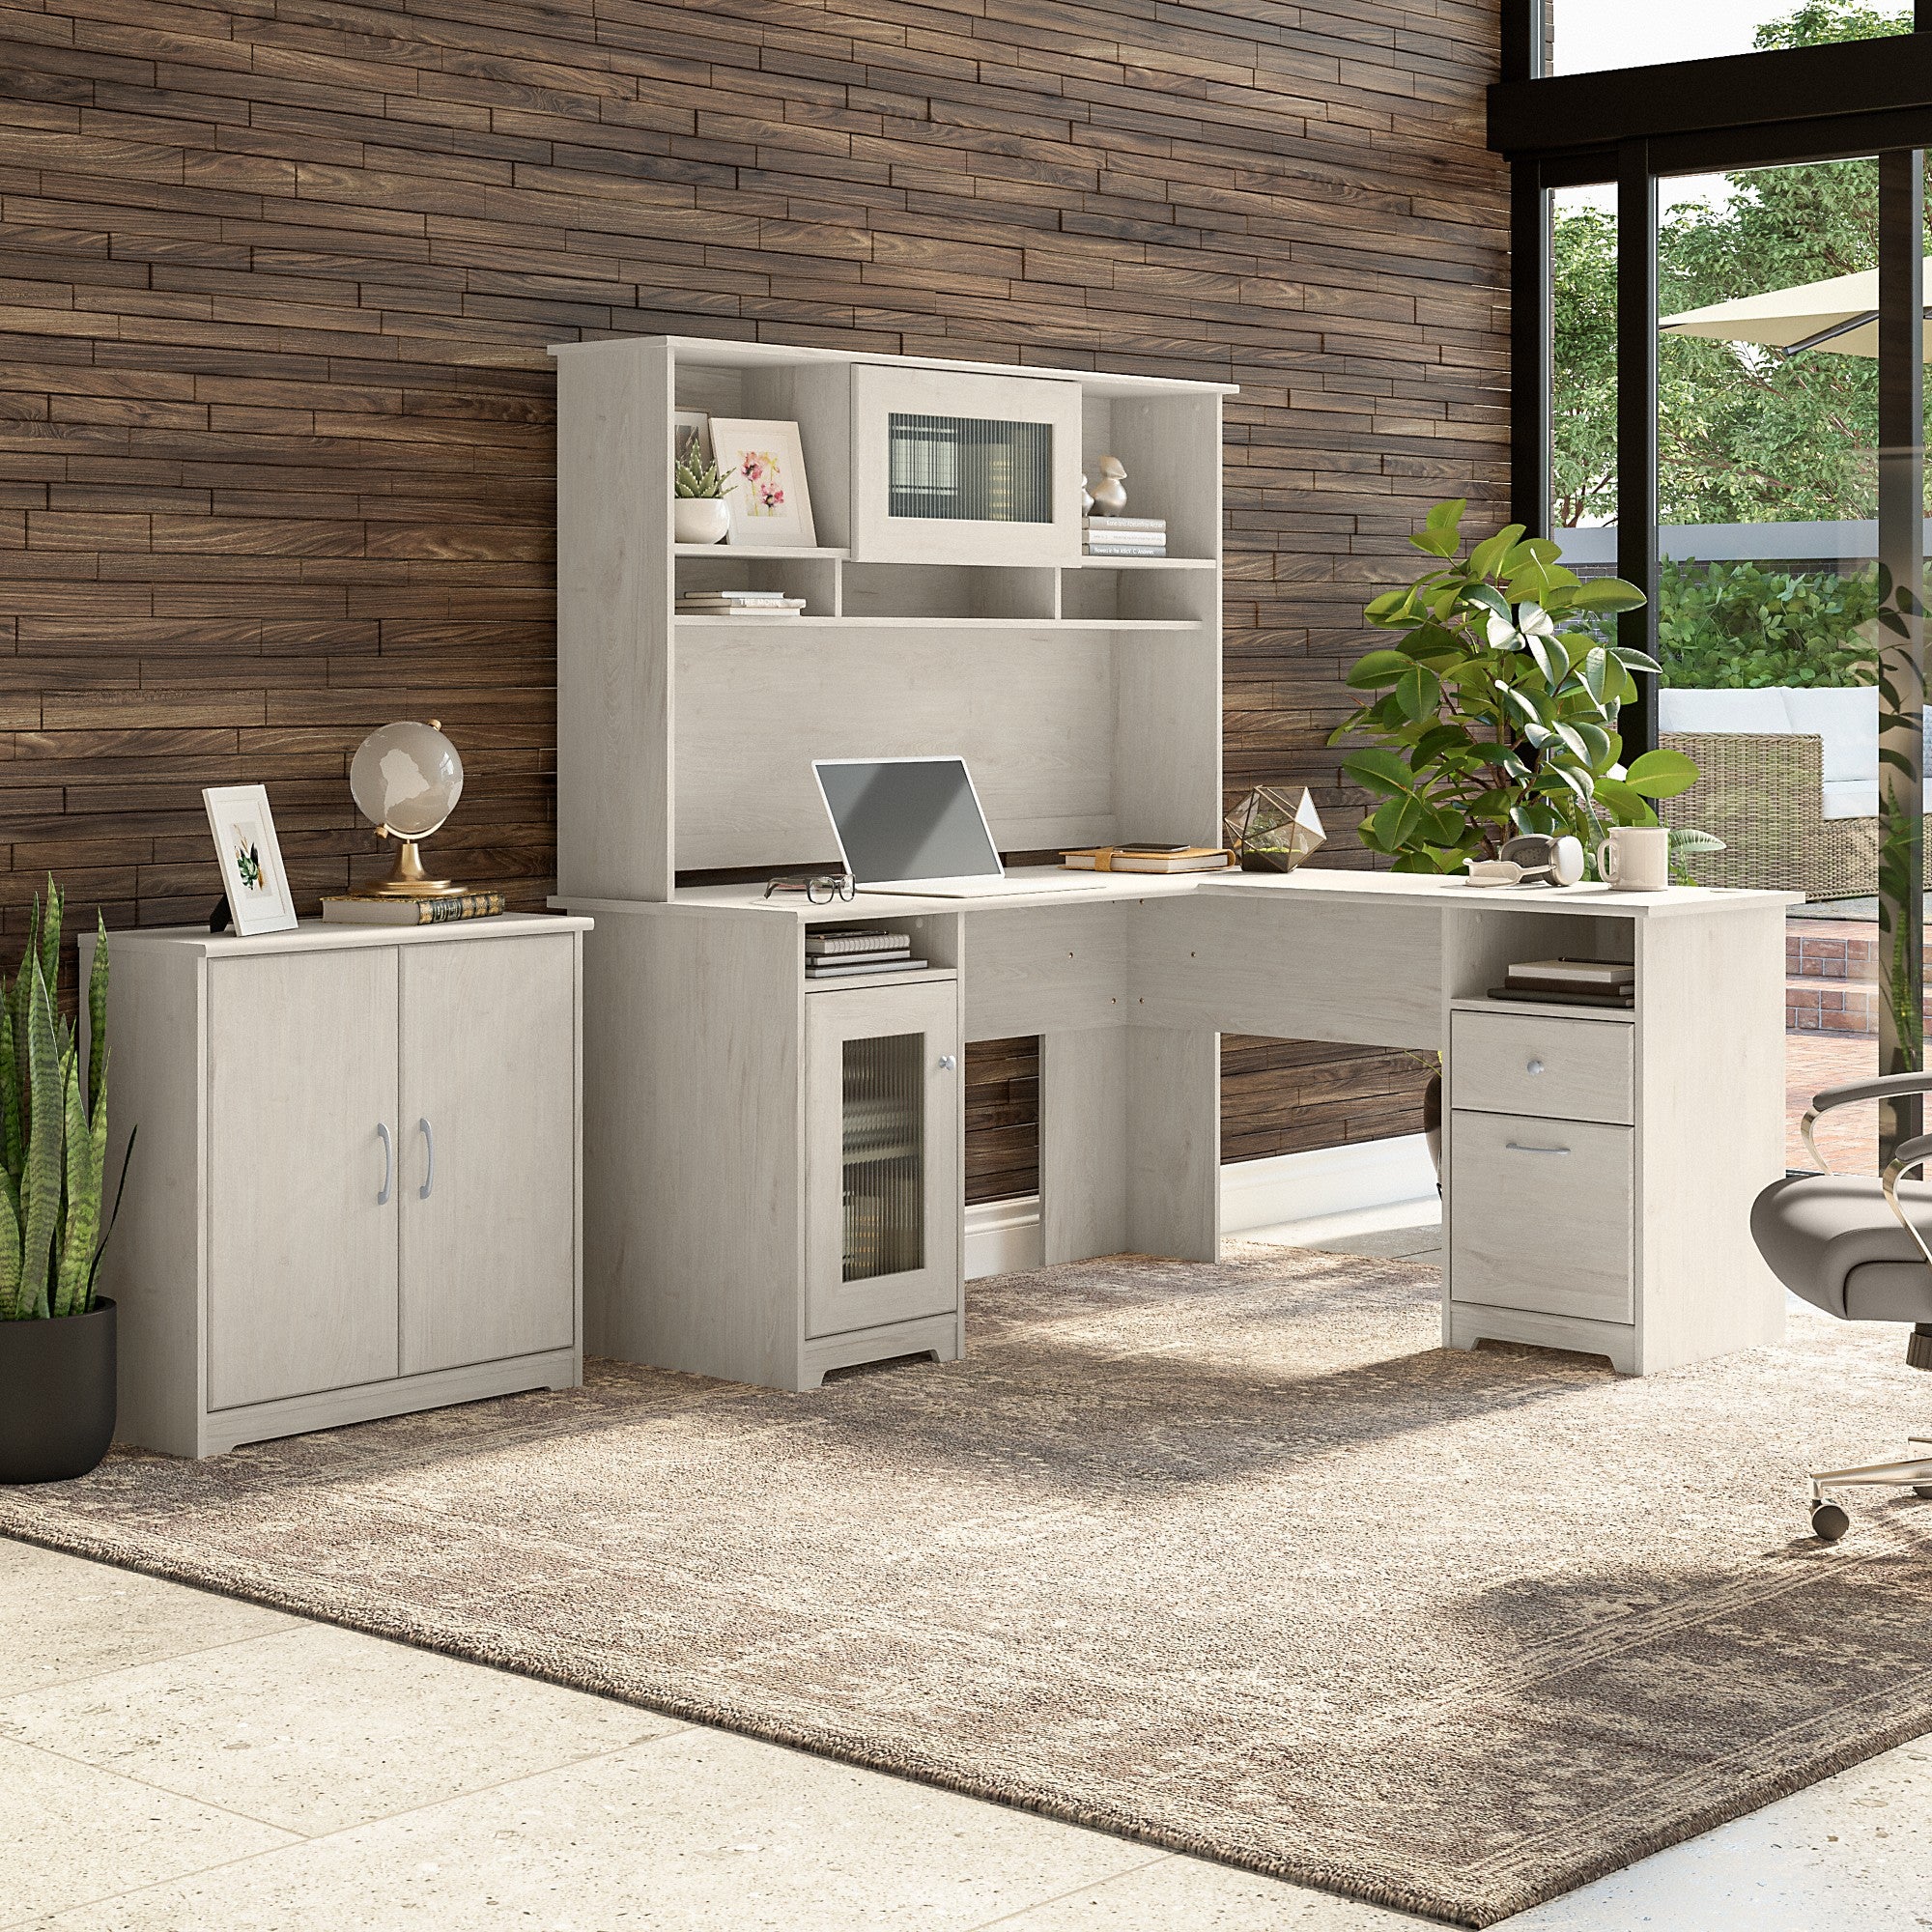 Bush Furniture Cabot Small Storage Cabinet with Doors